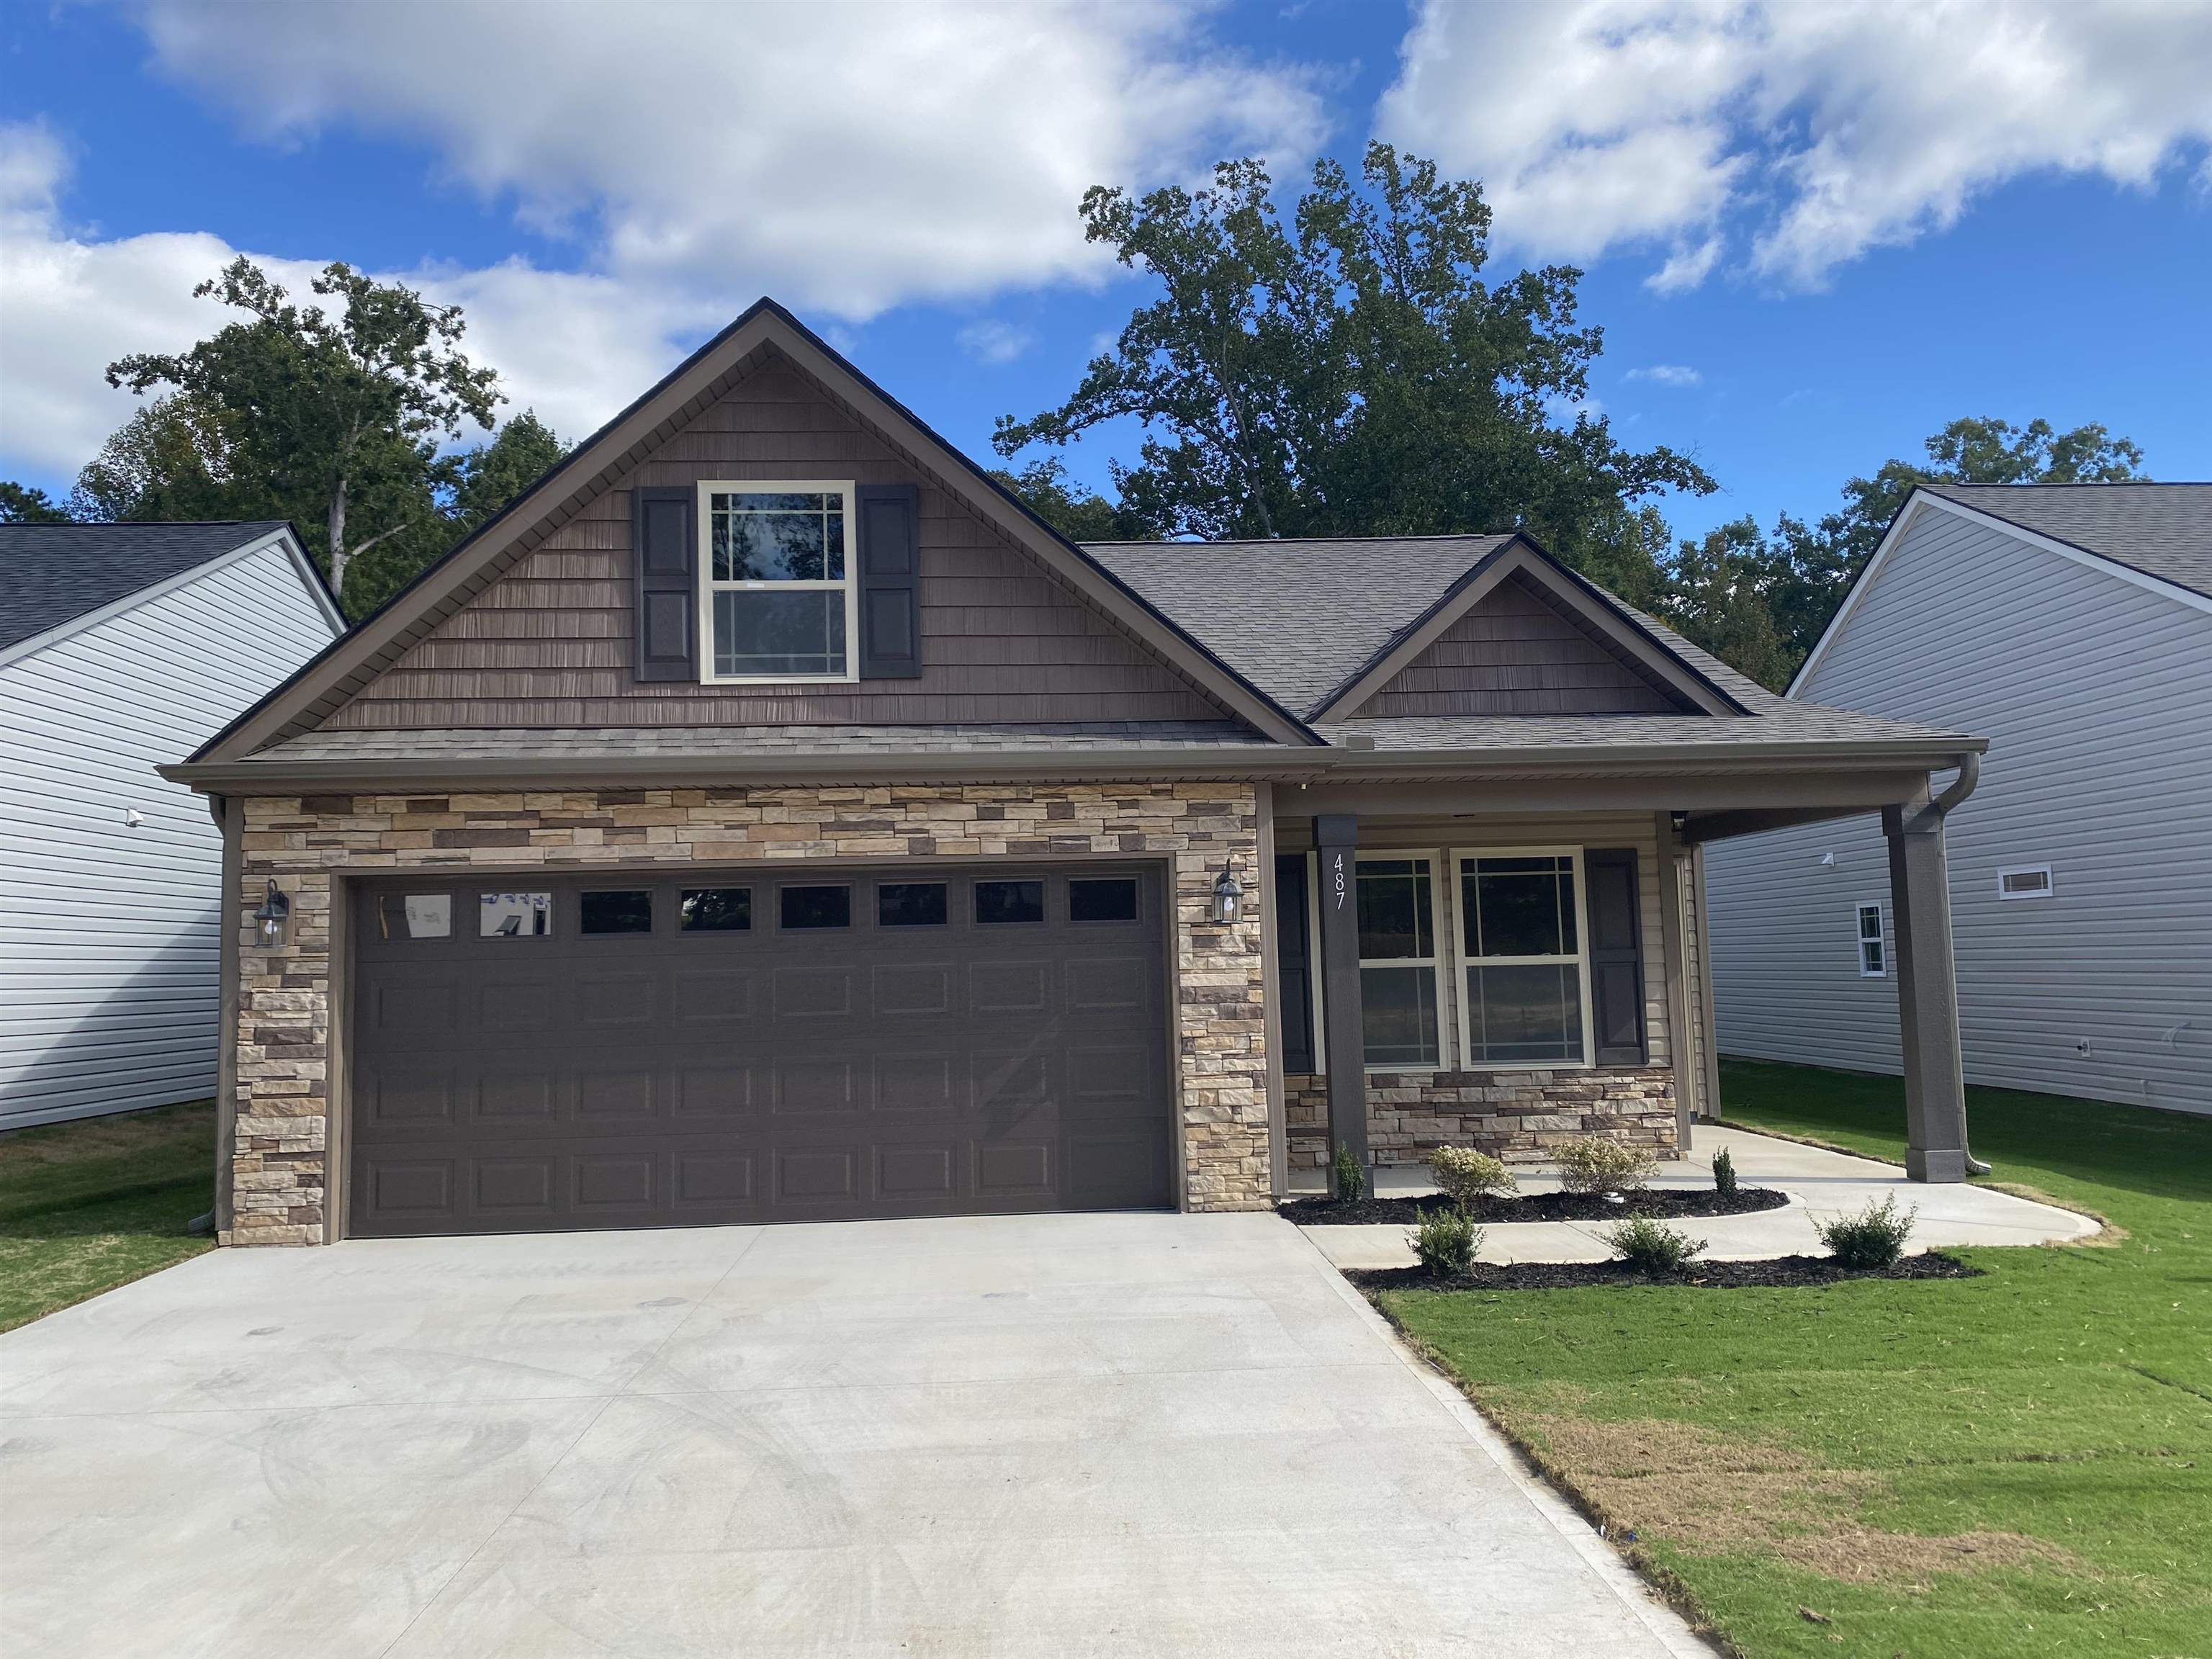 1368 SF Clifton plan - 3BR/2BA home being built for customer. Features include: granite countertops, Marsh cabinets, lots of crown molding and custom trim. Lot 33